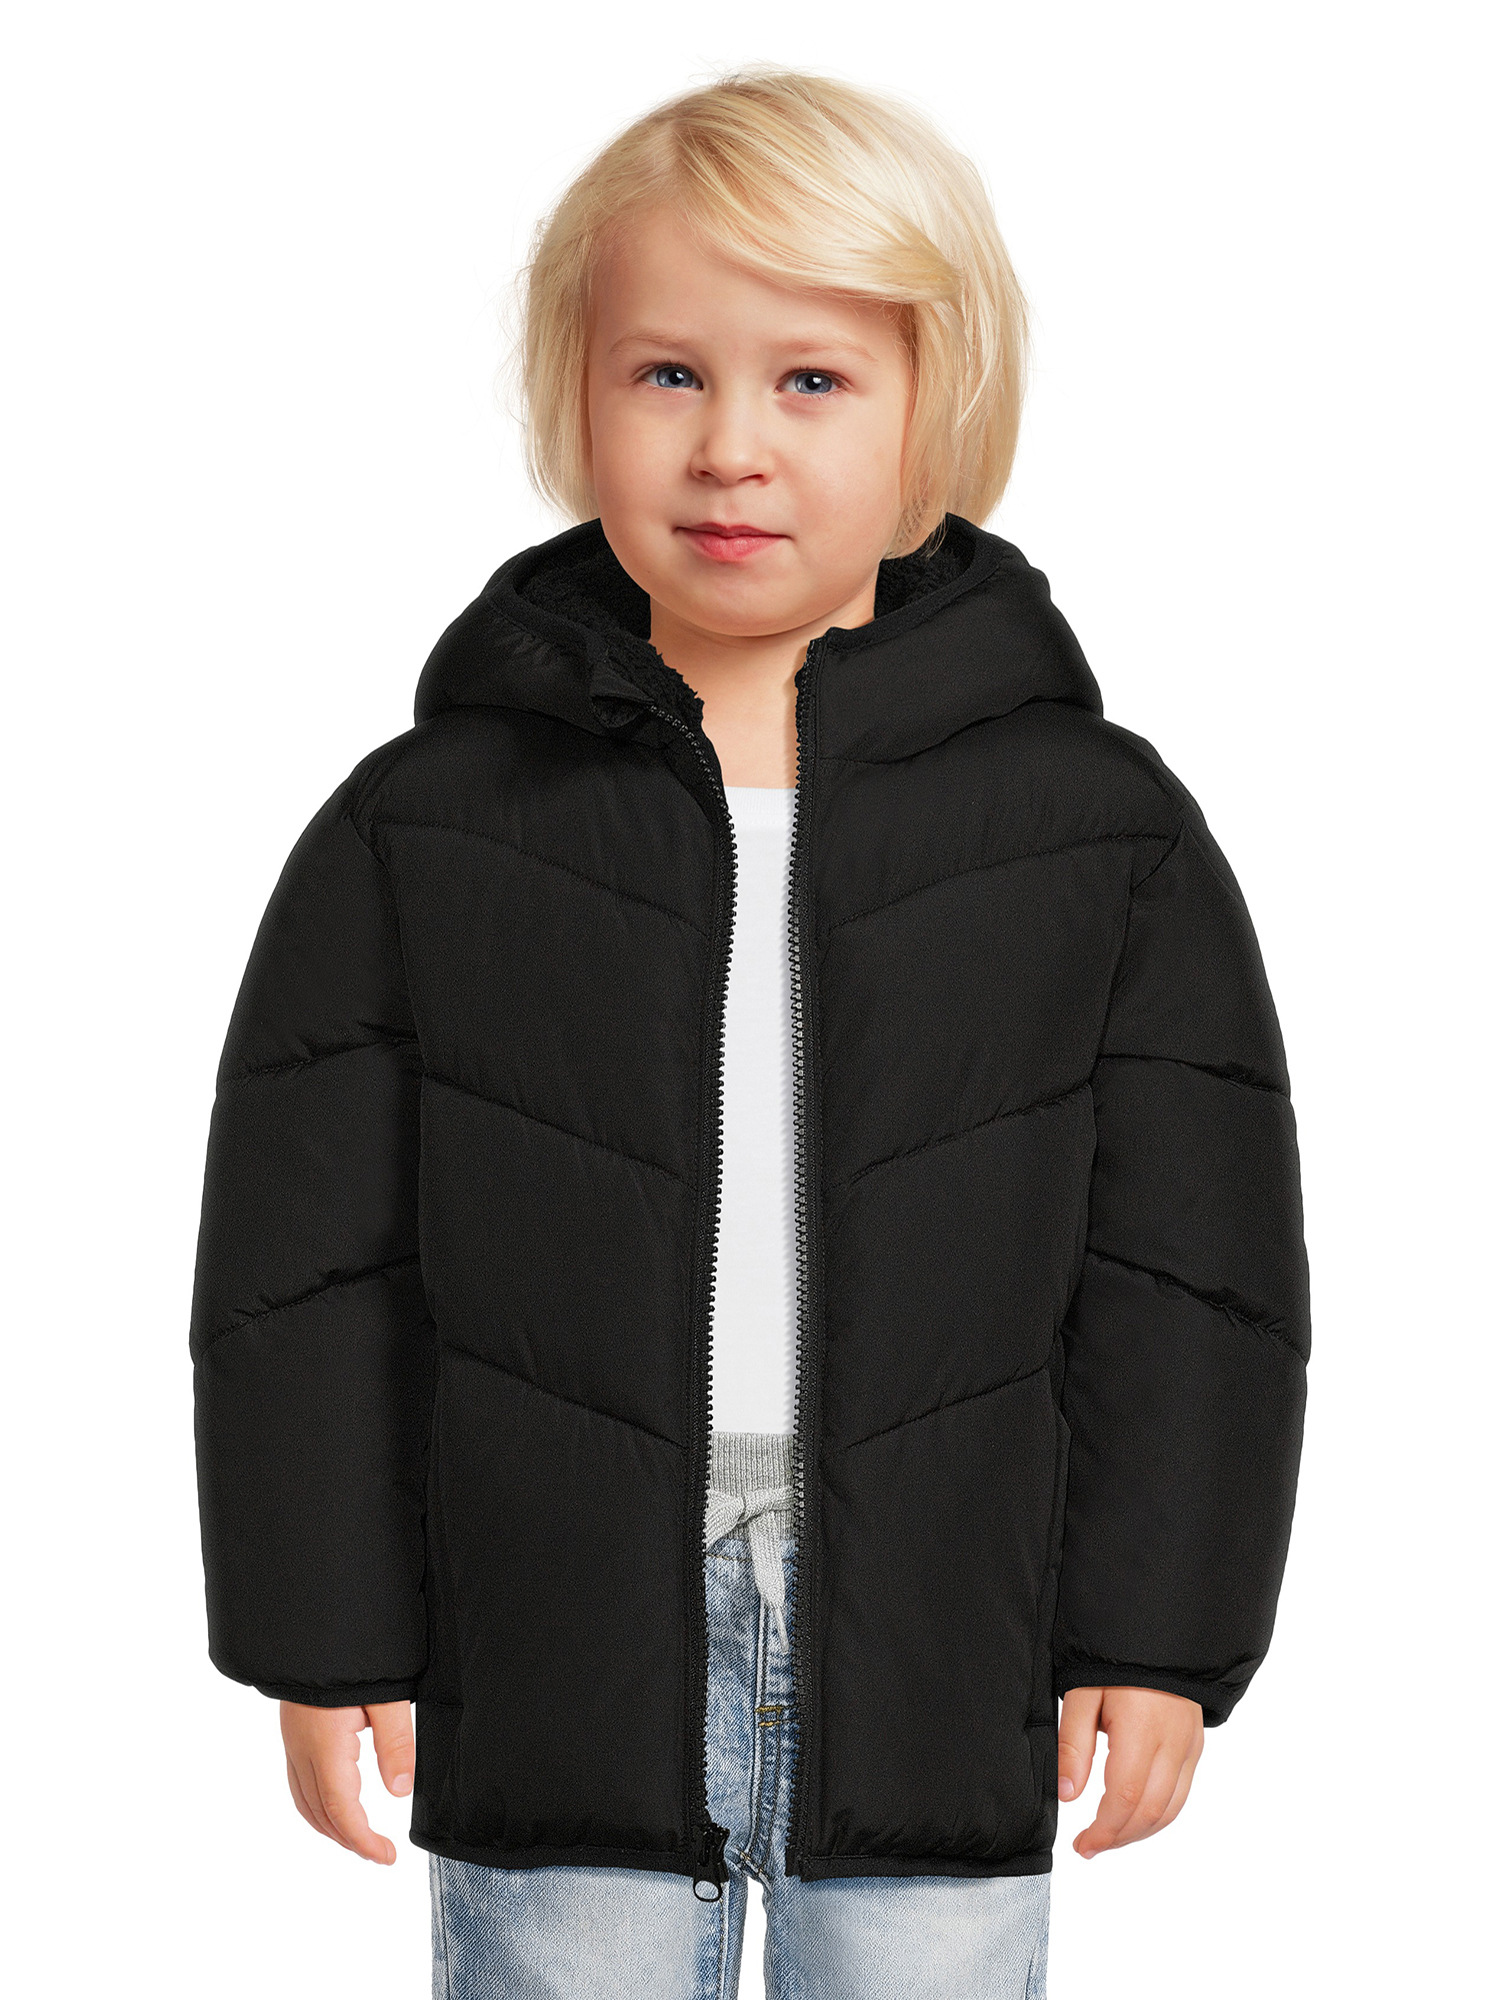 Swiss Tech Baby and Toddler Boy Heavyweight Puffer Jacket, Sizes 12M-5T - image 1 of 5